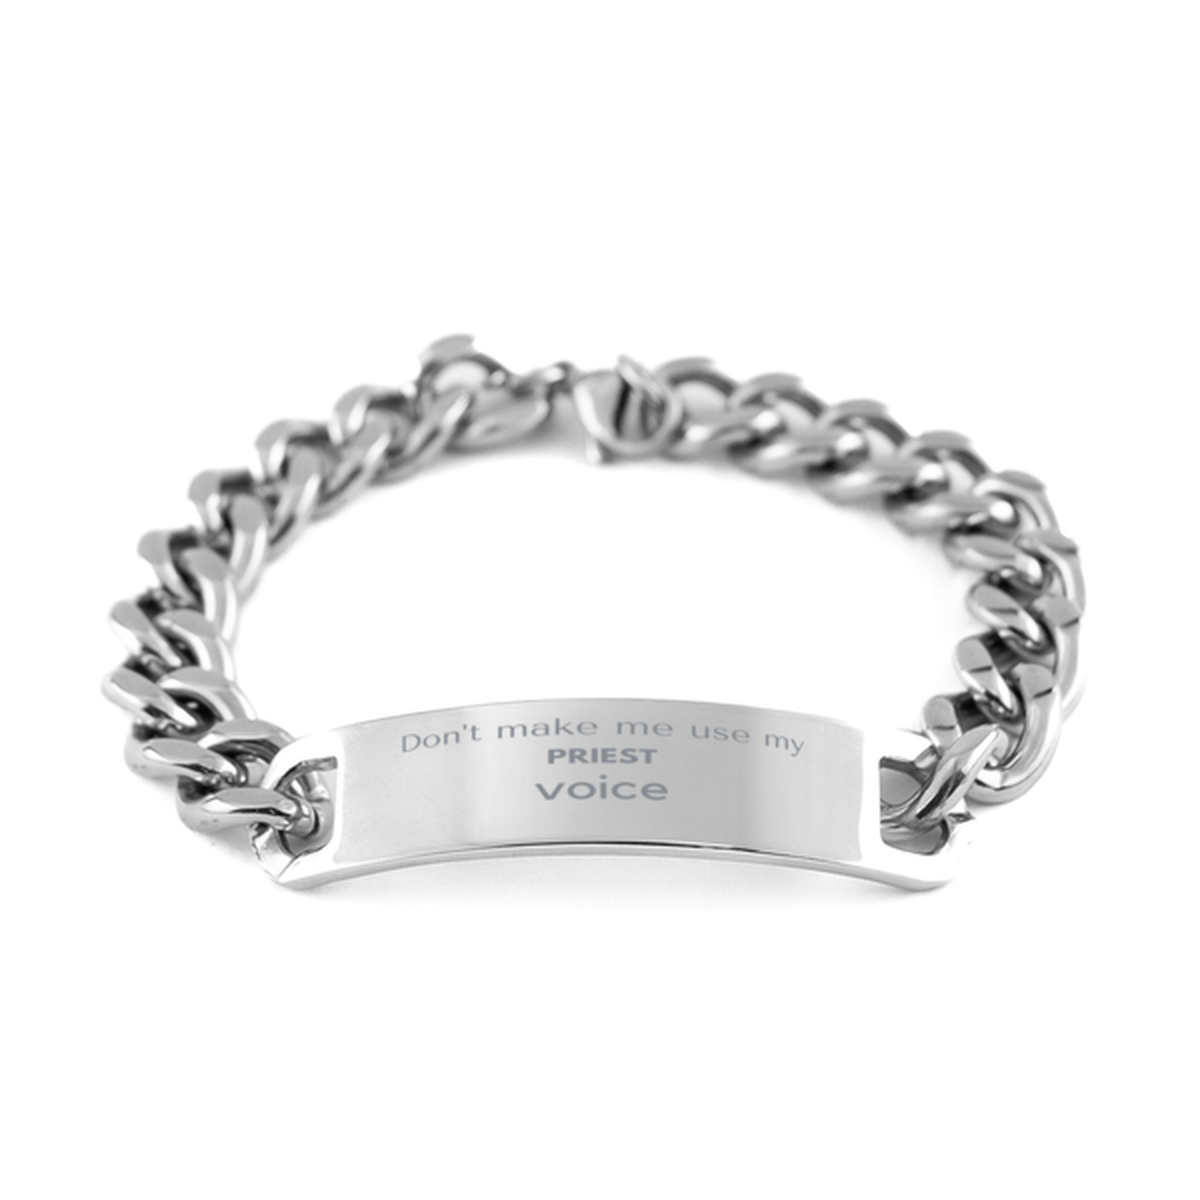 Don't make me use my Priest voice, Sarcasm Priest Gifts, Christmas Priest Cuban Chain Stainless Steel Bracelet Birthday Unique Gifts For Priest Coworkers, Men, Women, Colleague, Friends